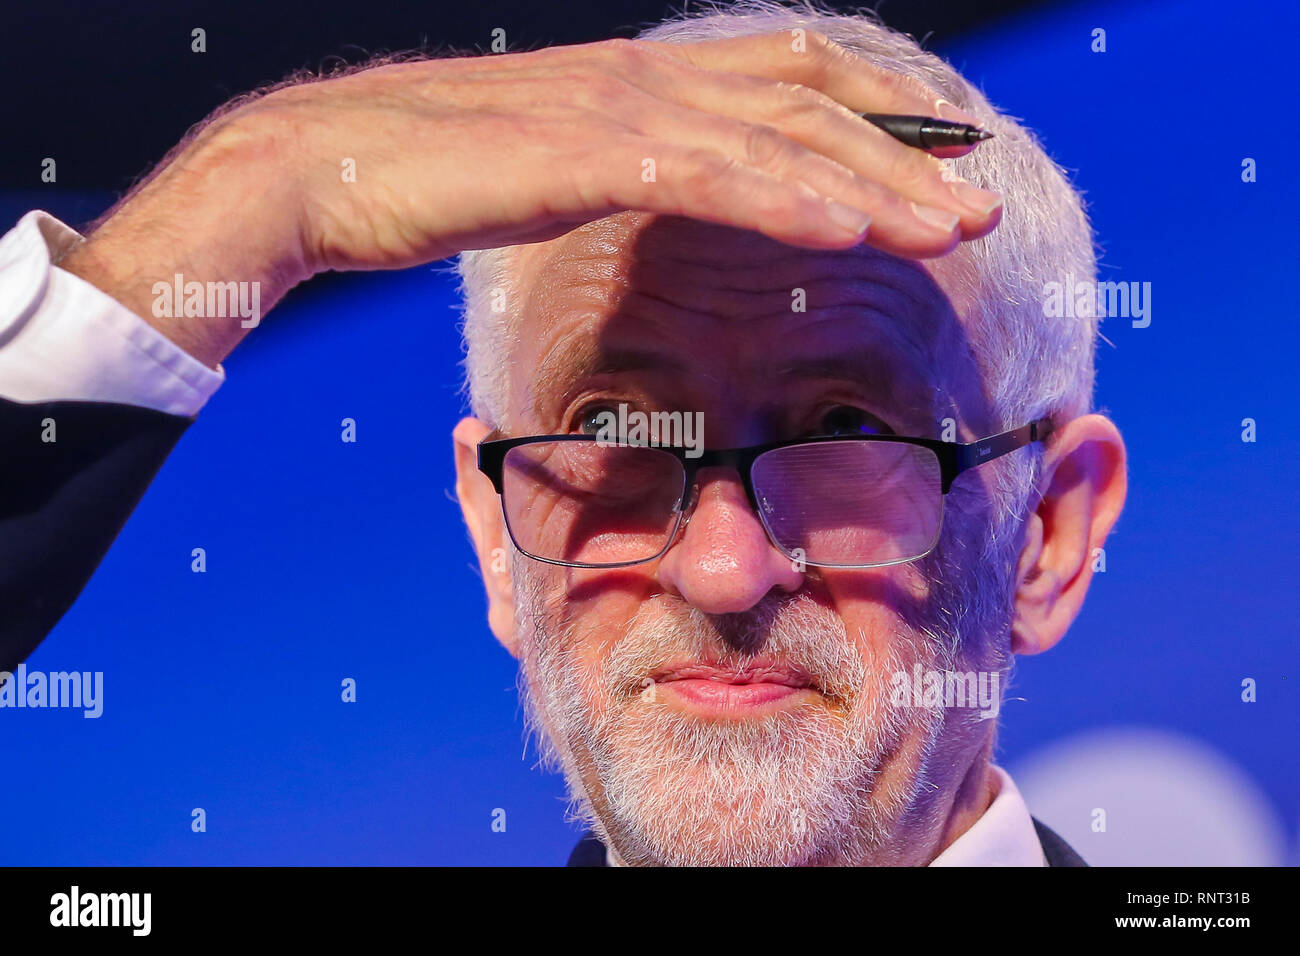 Jeremy Corbyn MP Leader of Labor Party is seen speaking during the 2019 National Manufacturing Conference in Queen Elizabeth II Center. The conference addresses the difficulties and challenges the manufacturing sector will face post-Brexit. Stock Photo